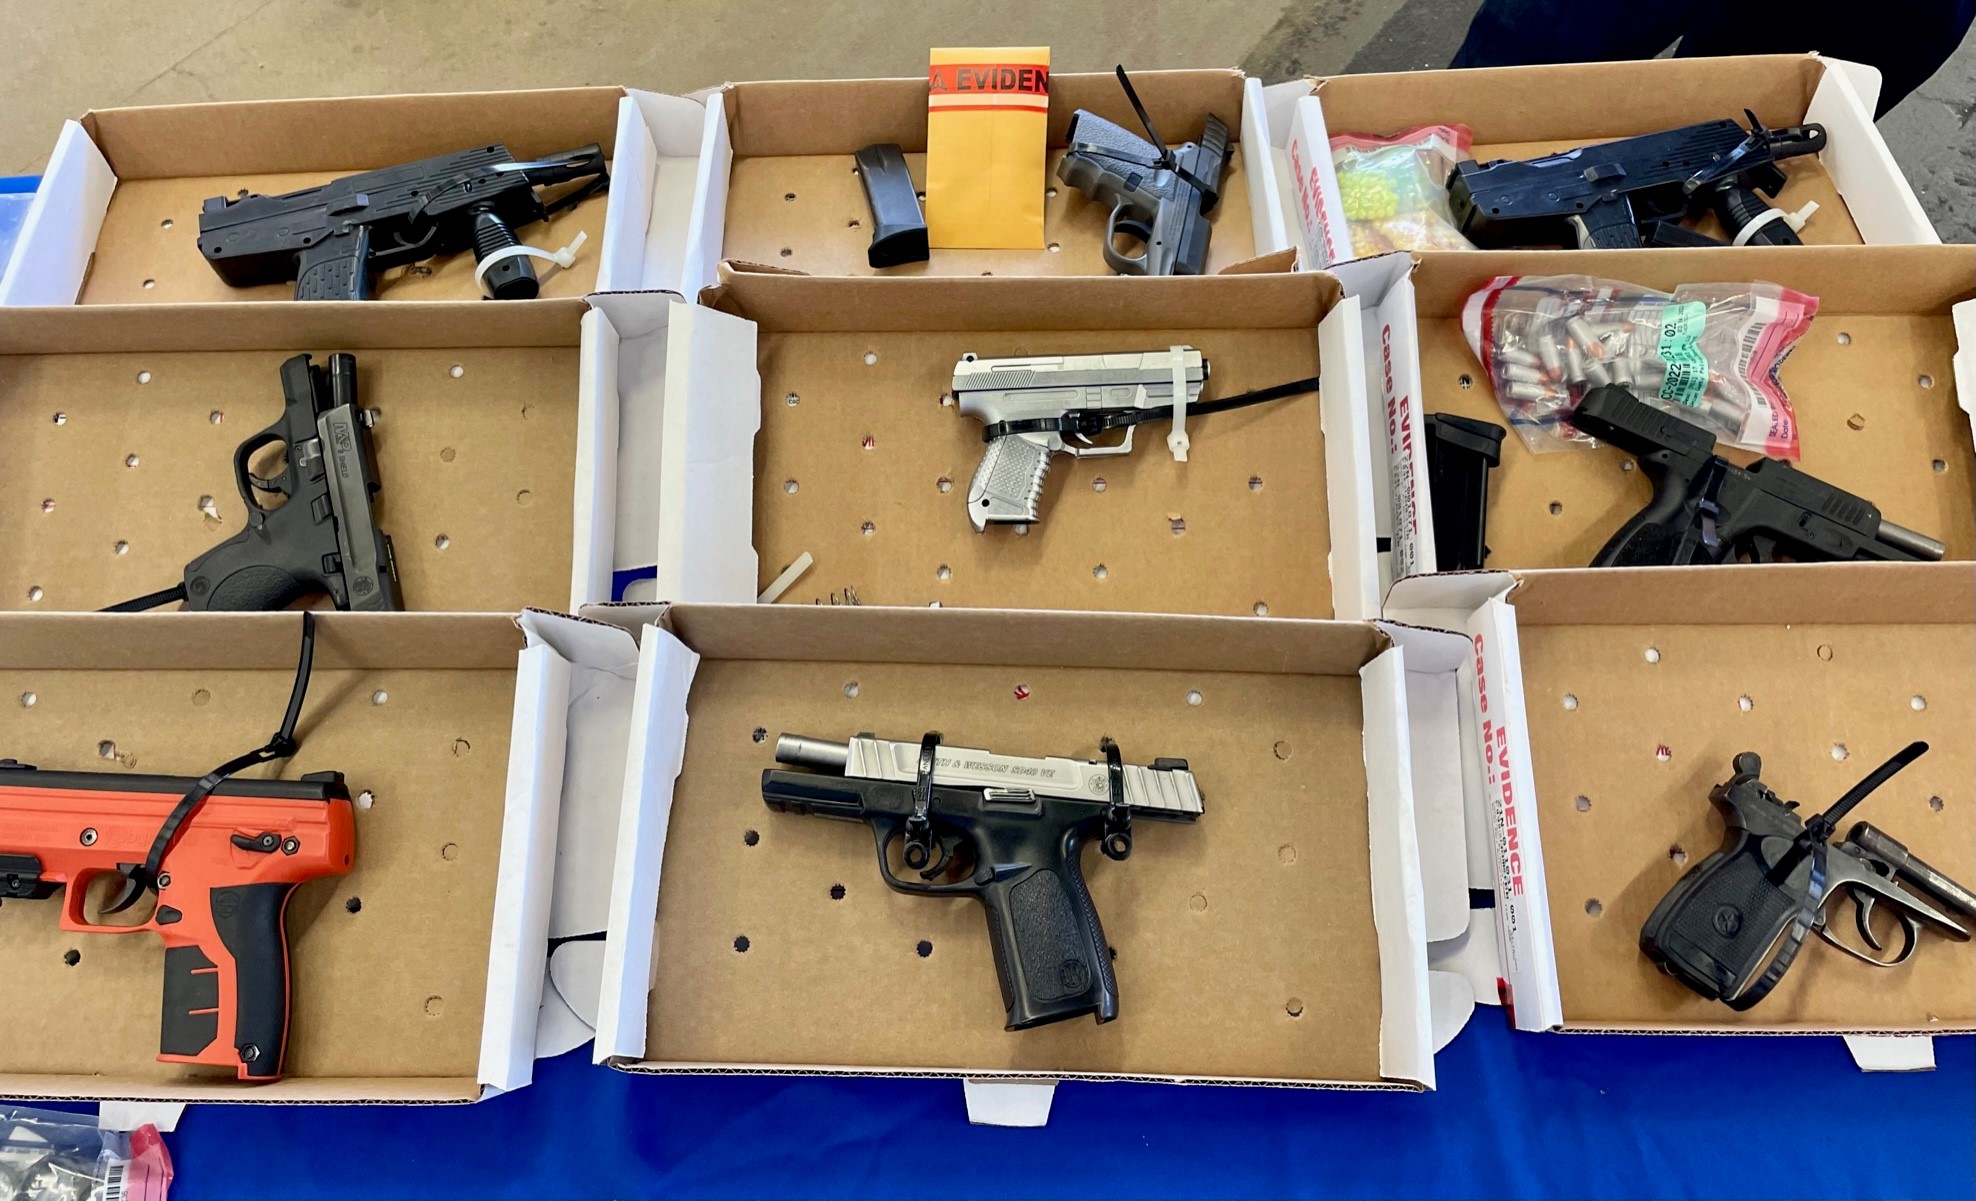 TSA, PAPD Alarmed About Frequency of Ammunition, Guns Carried to Newark Airport